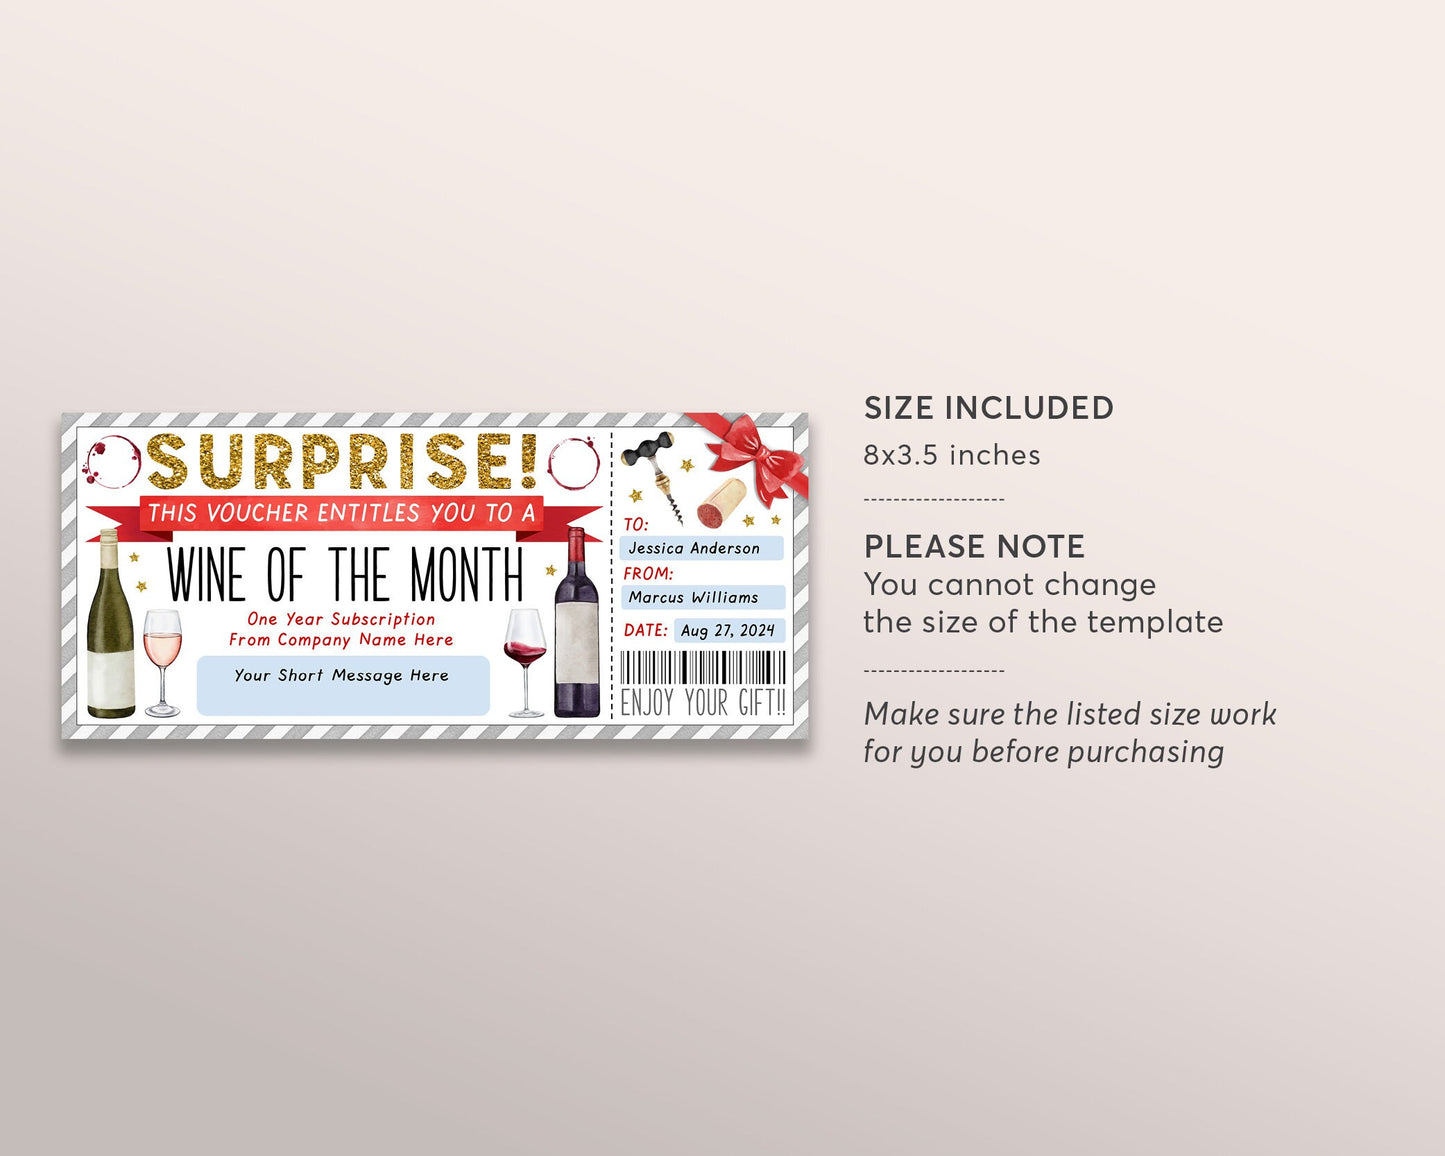 Wine Subscription Gift Certificate Editable Template, Surprise Wine Club Membership Voucher, Wine of the Month Coupon, Wine Tasting Ticket